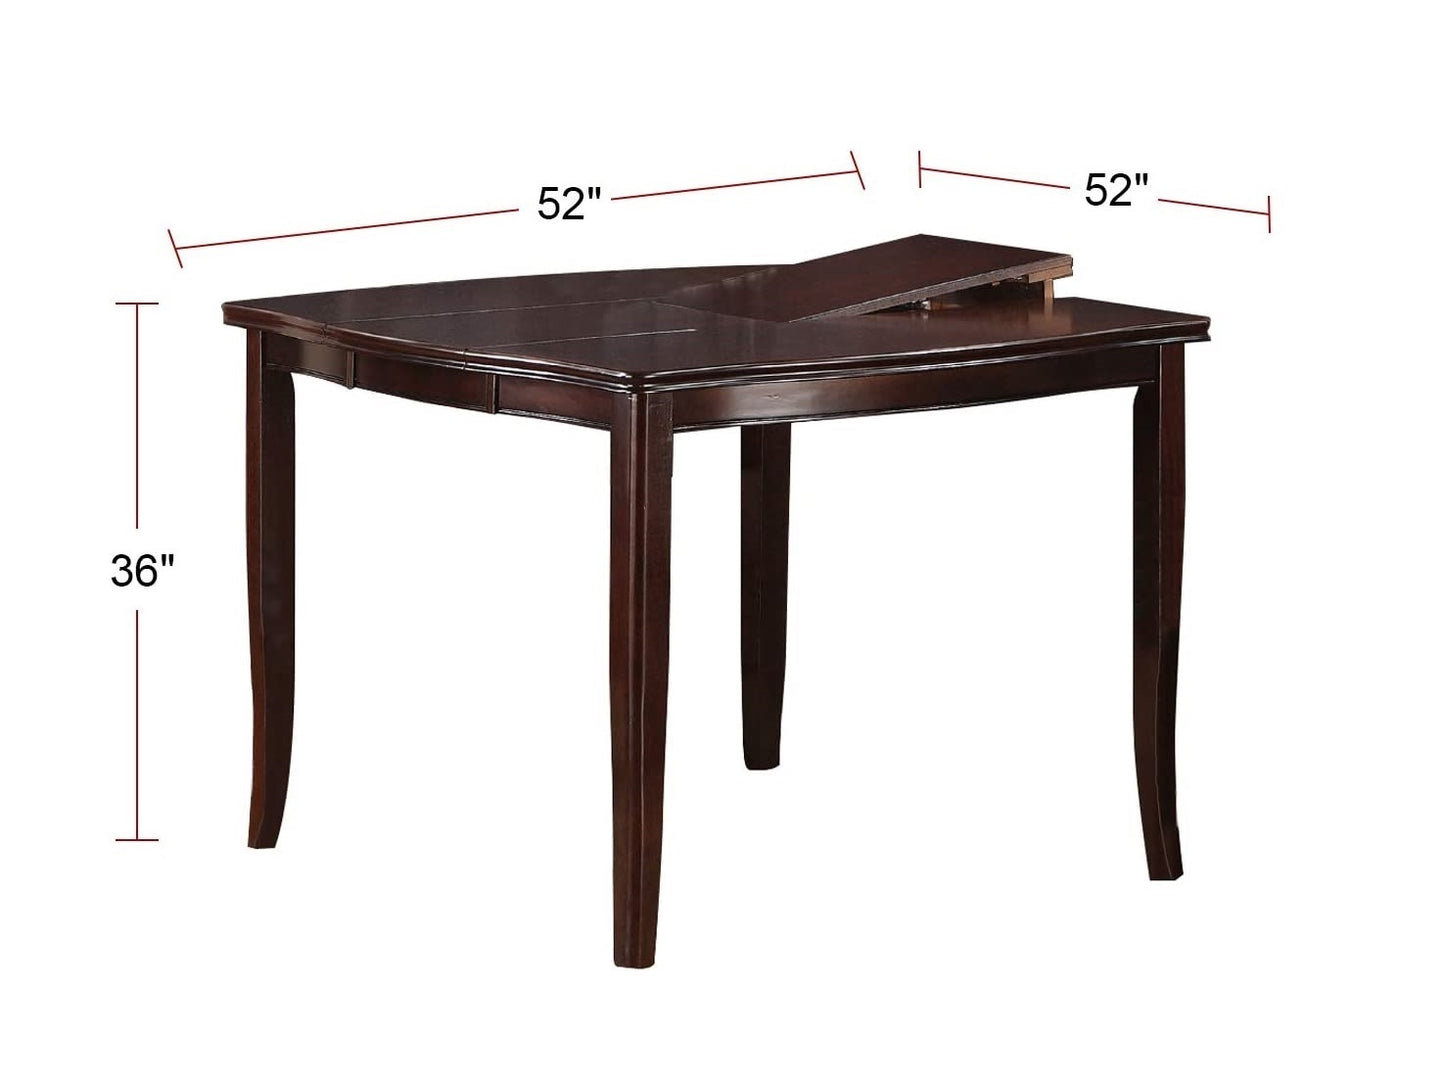 Contemporary Counter Height Dining 6pc Set Table w Butterfly Leaf 4x Chairs A Bench Brown Finish Rubberwood Chairs Cushions Kitchen Dining Room Furniture